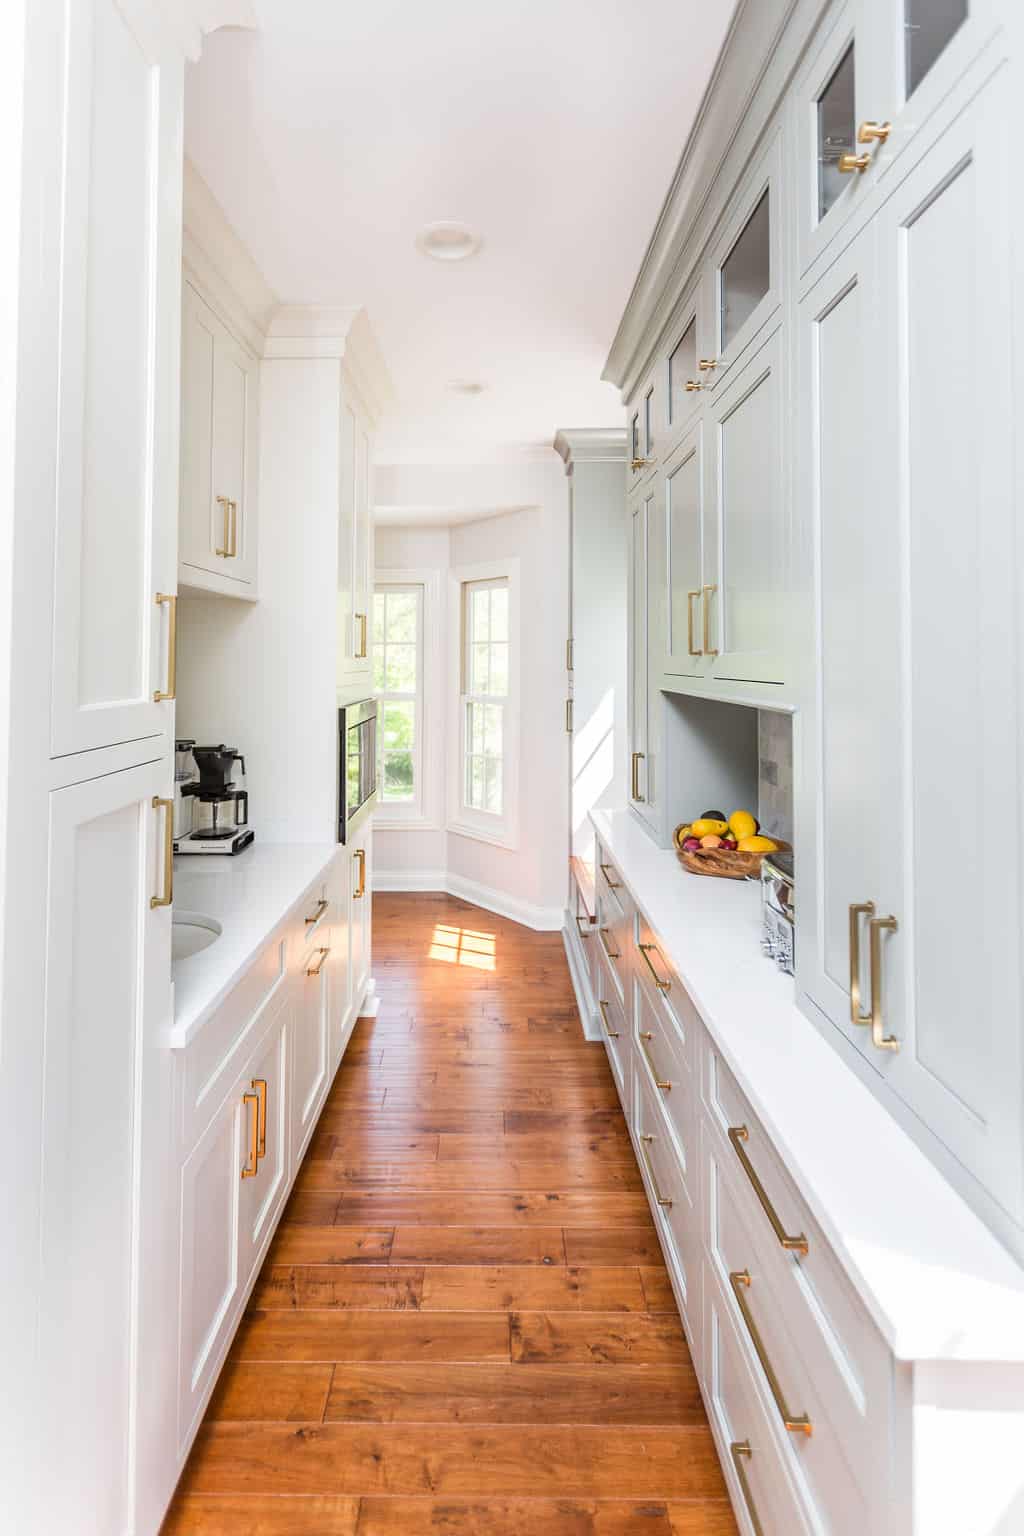 Nicholas Design Build | A remodelled white kitchen with wood floors and white cabinets.